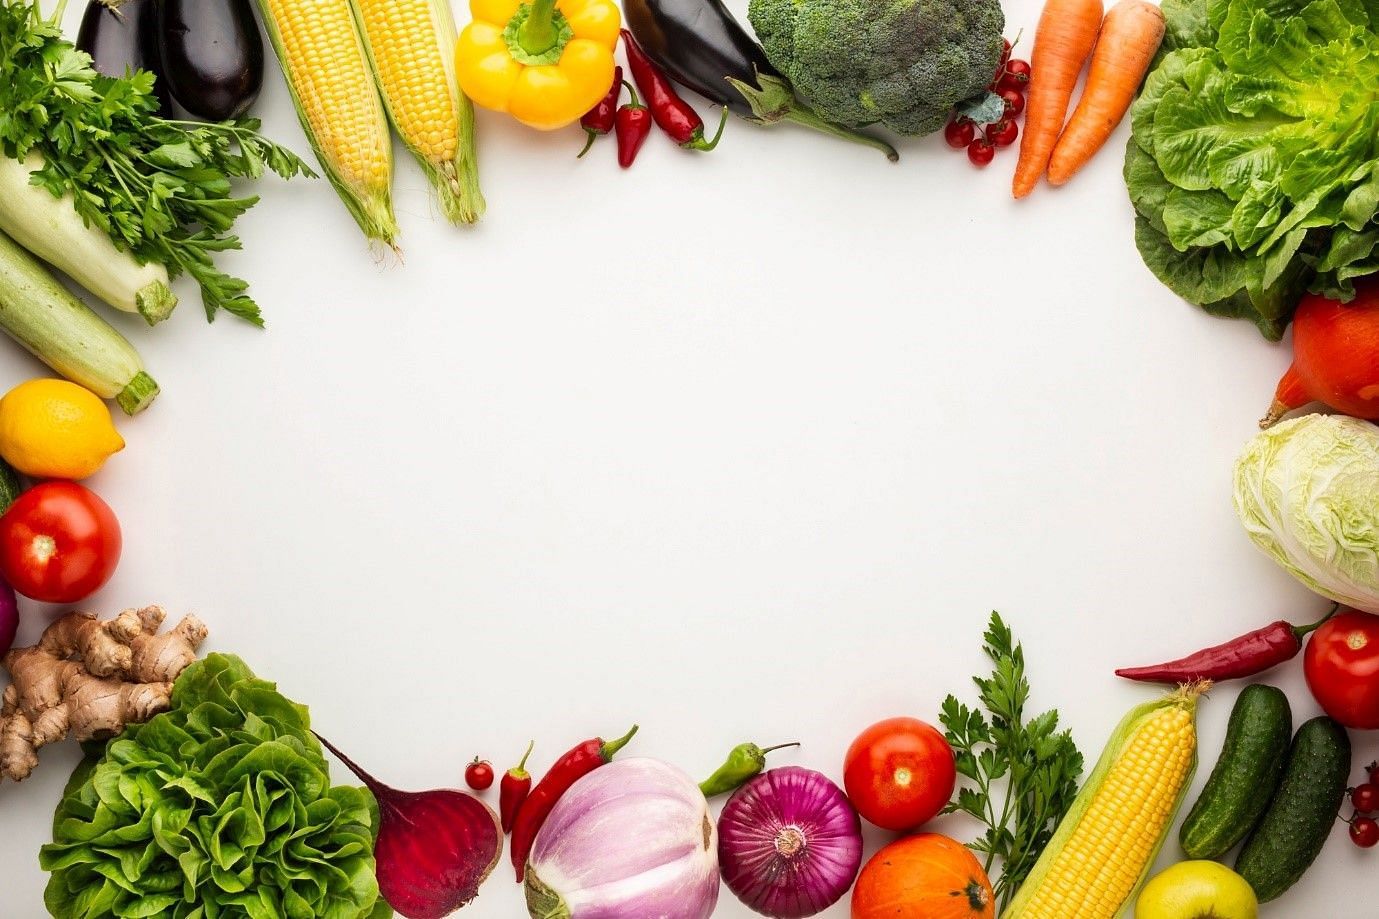 What are the several benefits of eating vegetables? (image by freepik on freepik)